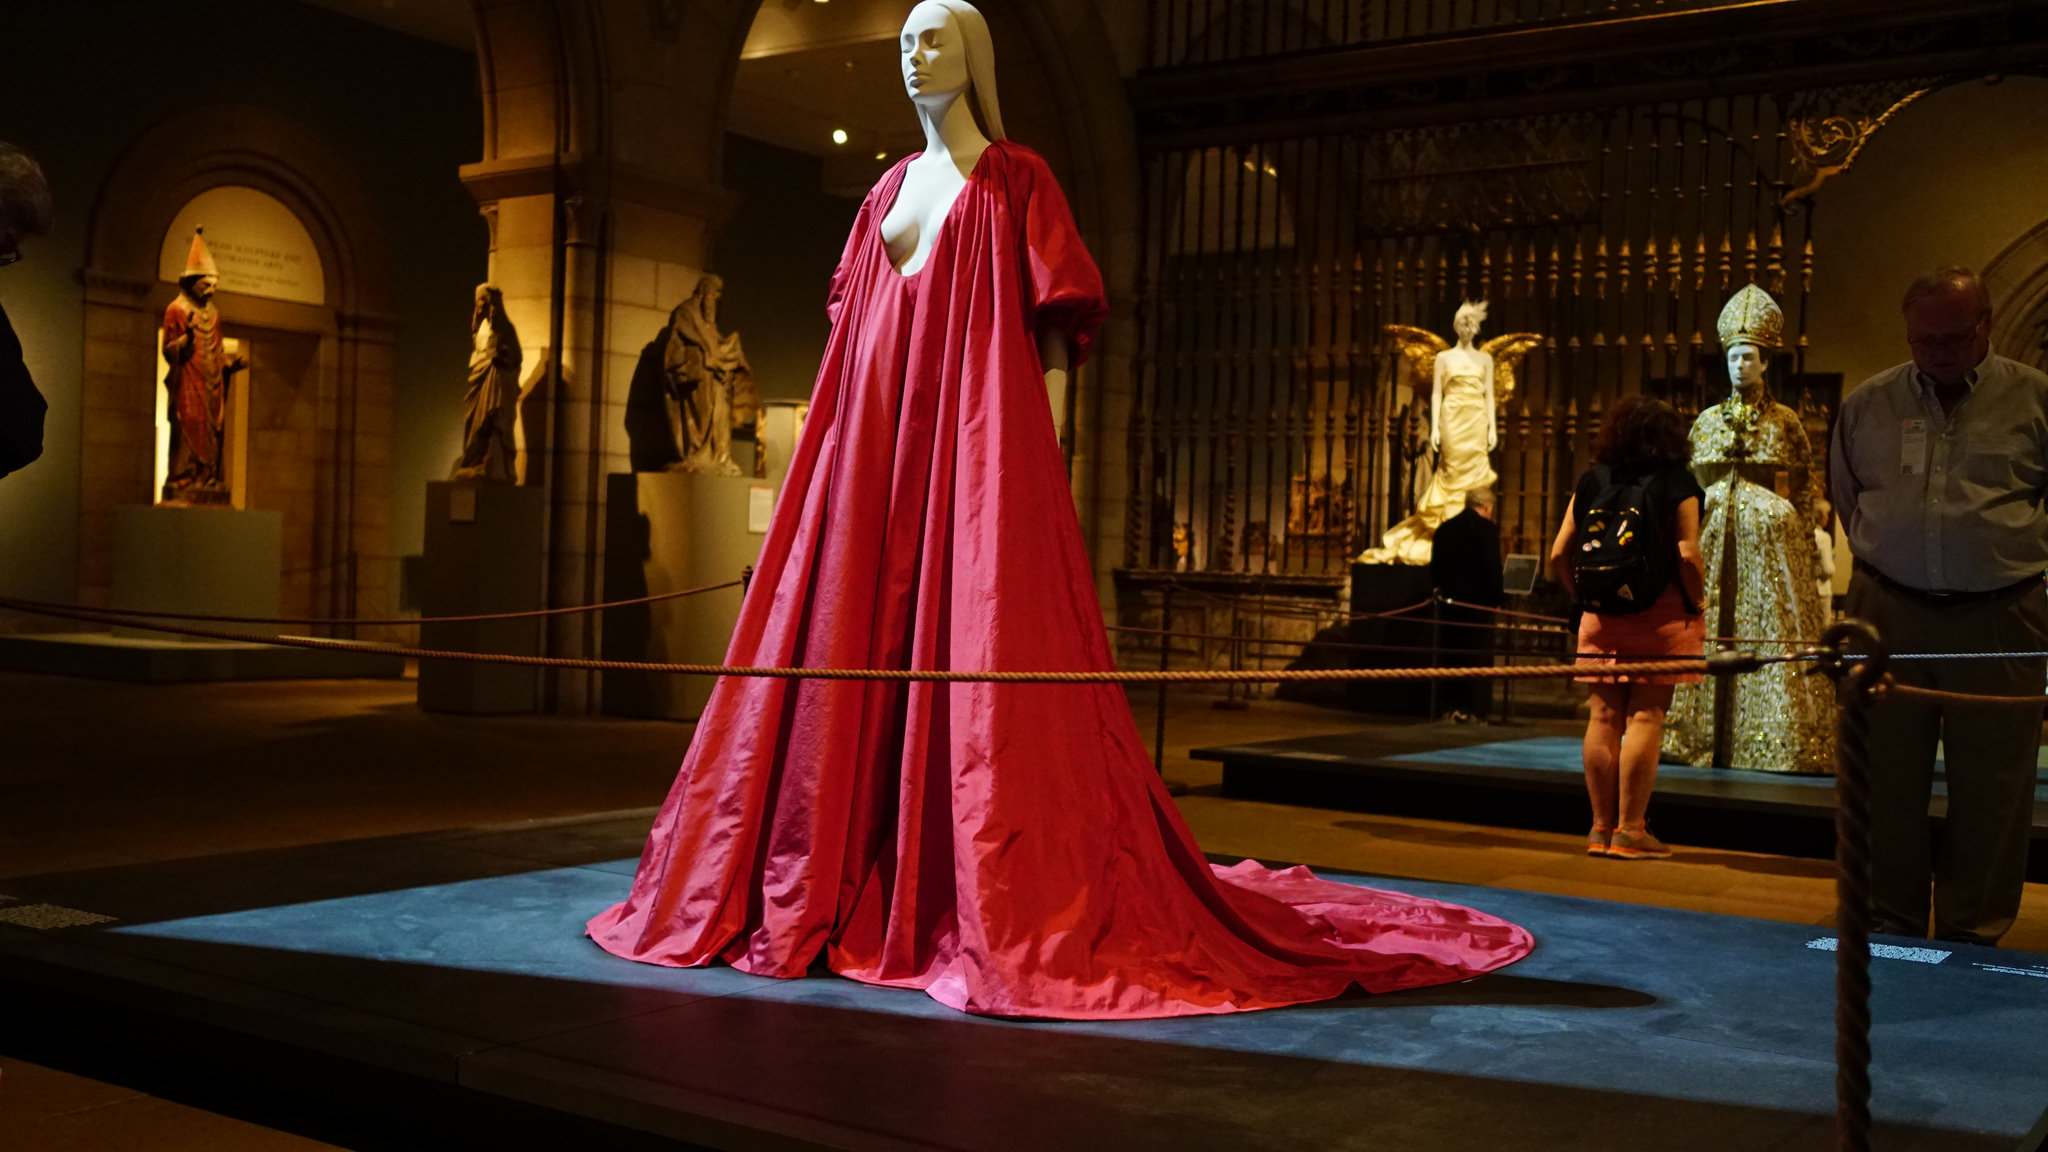 heavenly bodies6 Heavenly Bodies: Fashion and the Catholic Imagination in MET